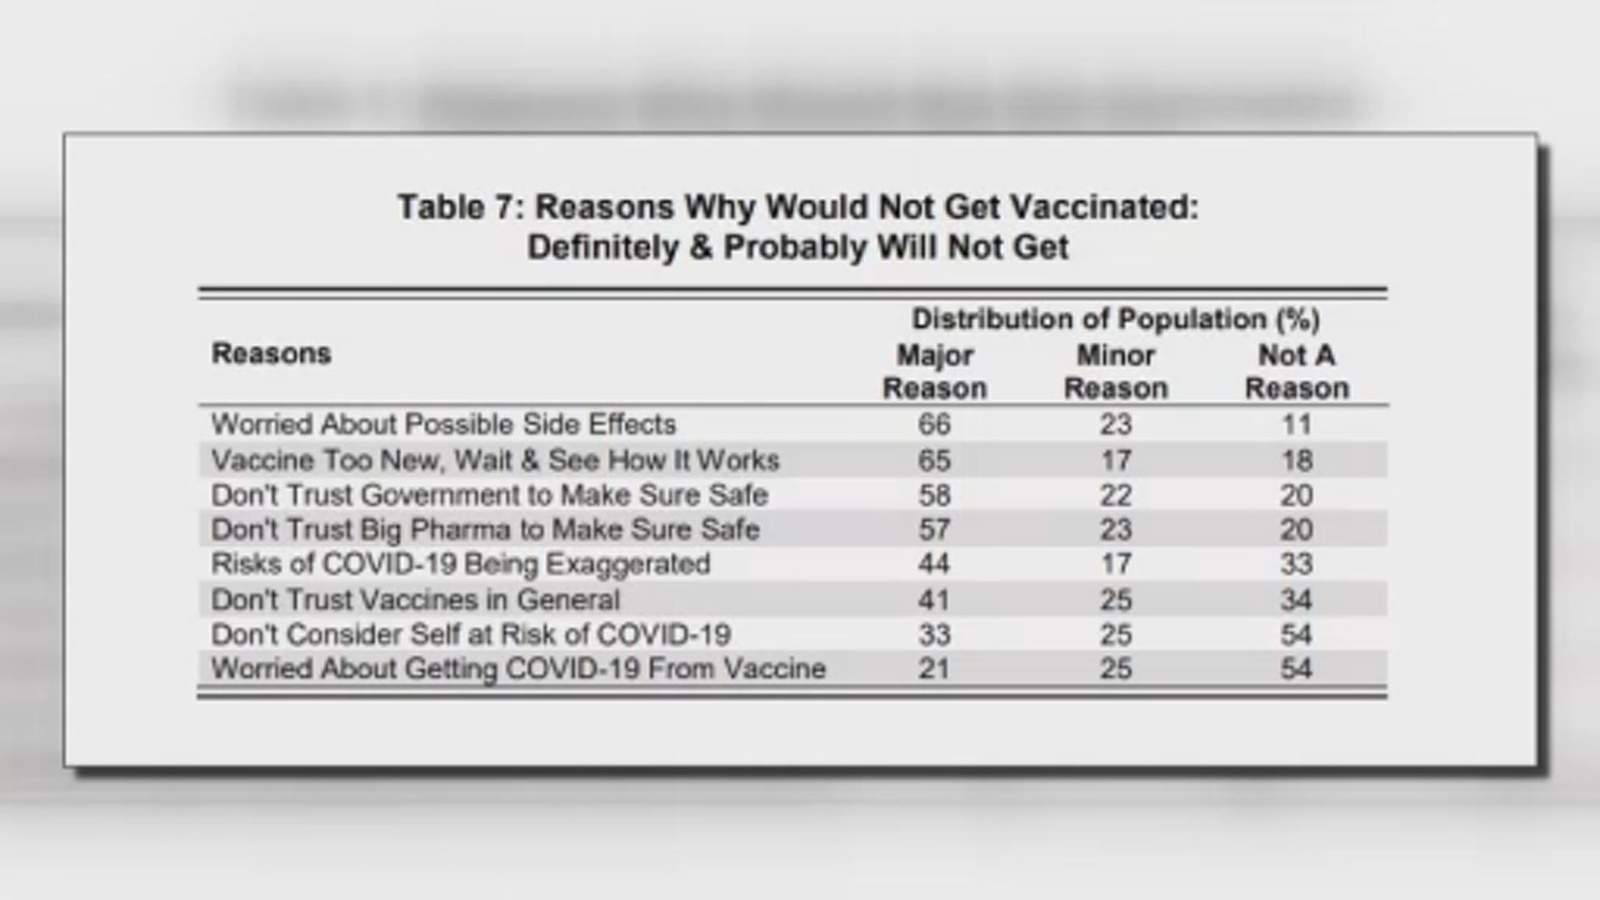 UH survey shows 1/3 of Texans may refuse COVID-19 vaccine